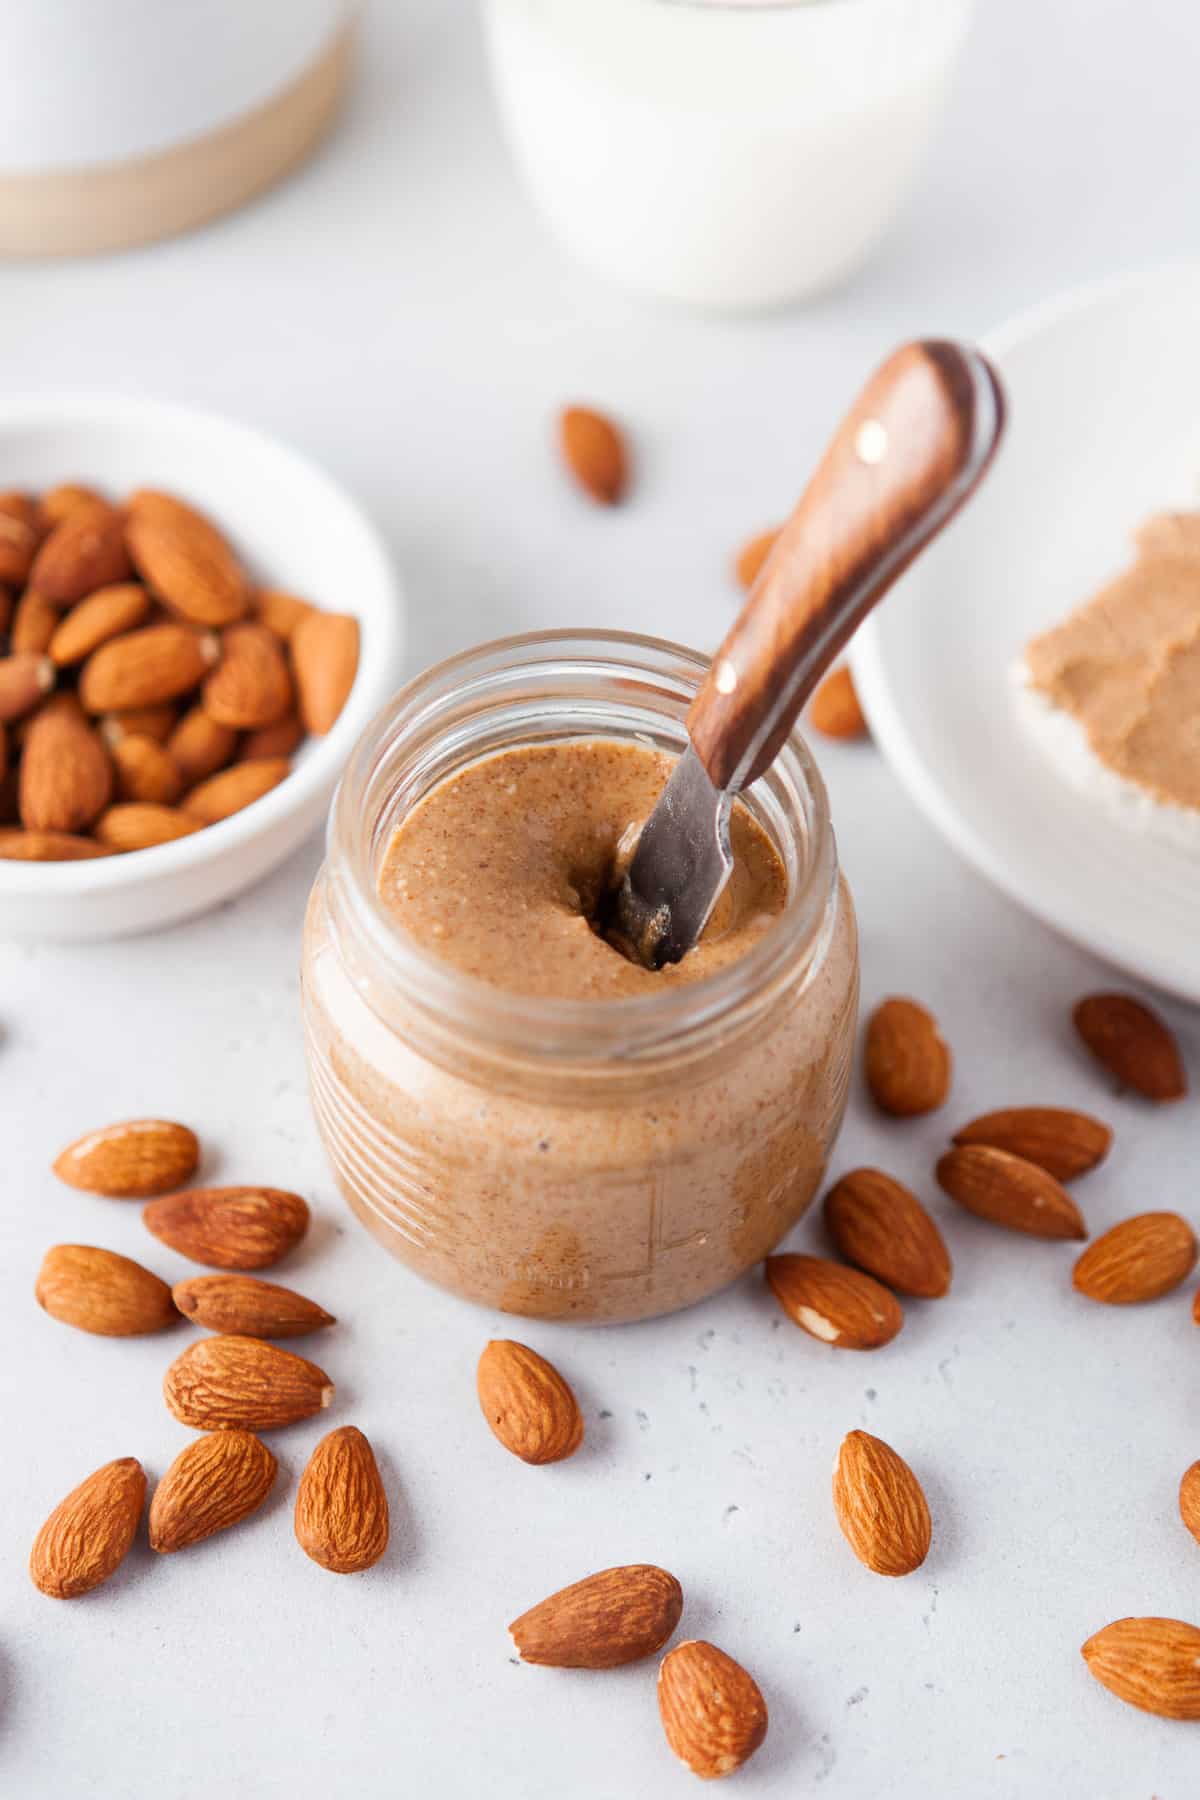 Homemade almond butter in a jar with a spreader.